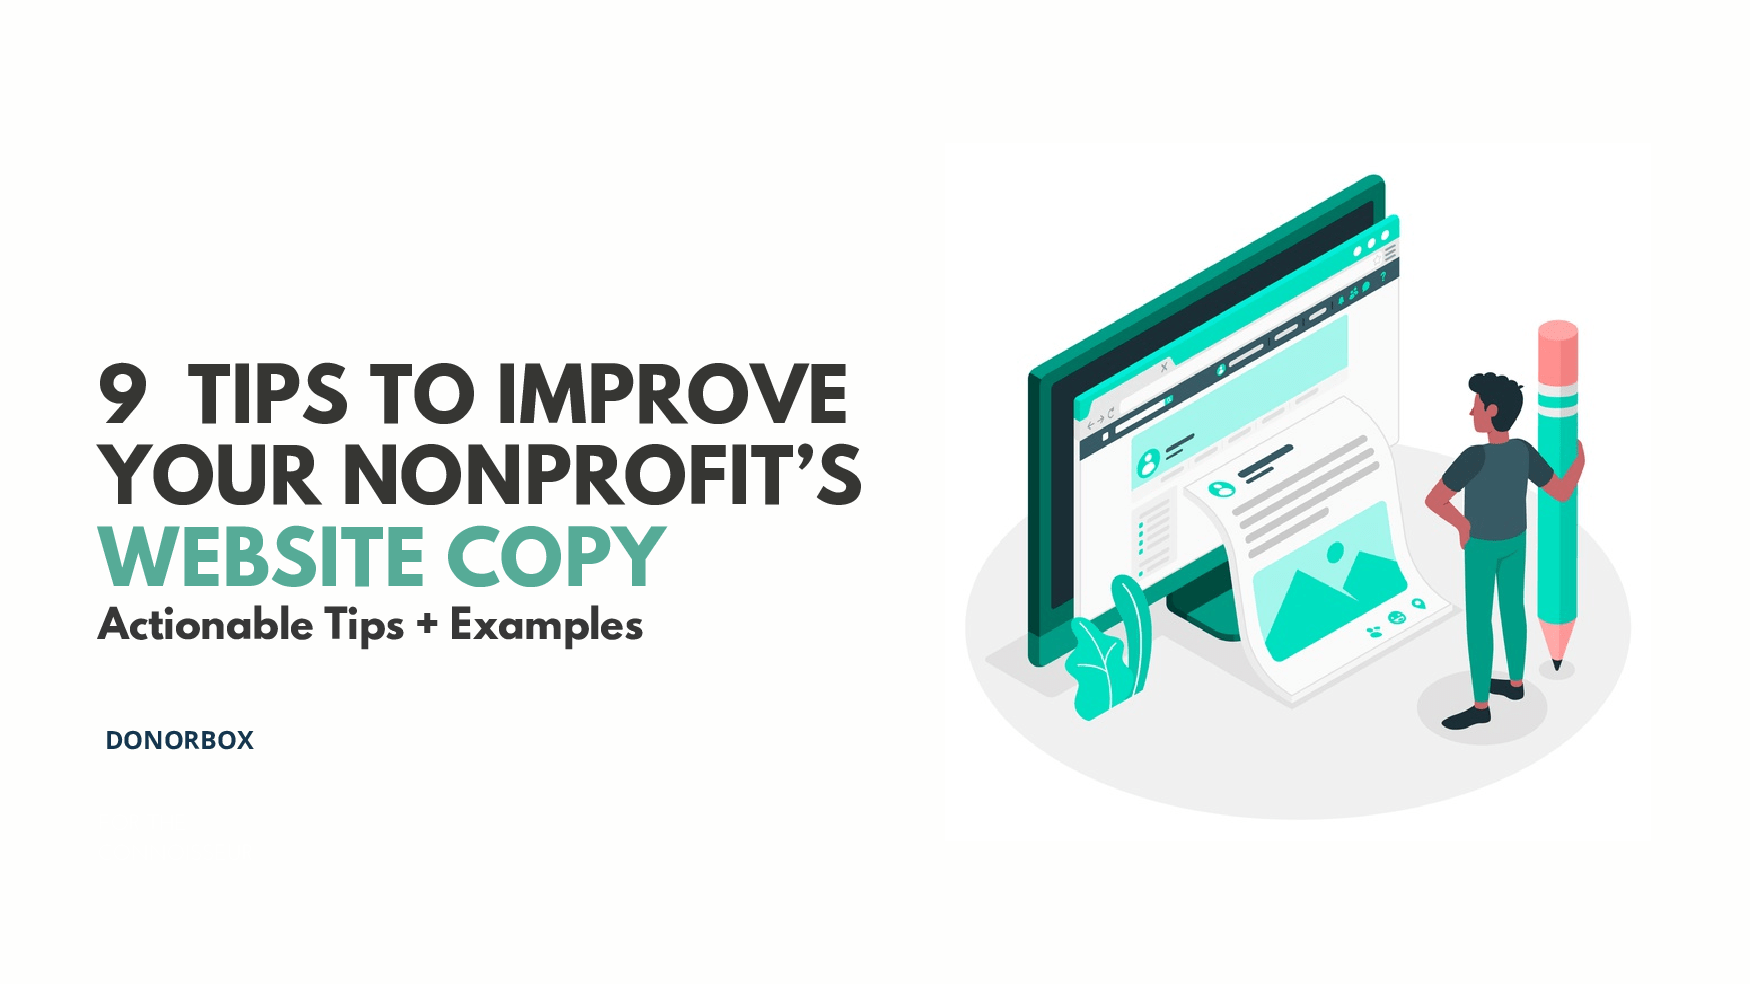 Online Fundraising Site: How To Create A Great Website for your Nonprofit